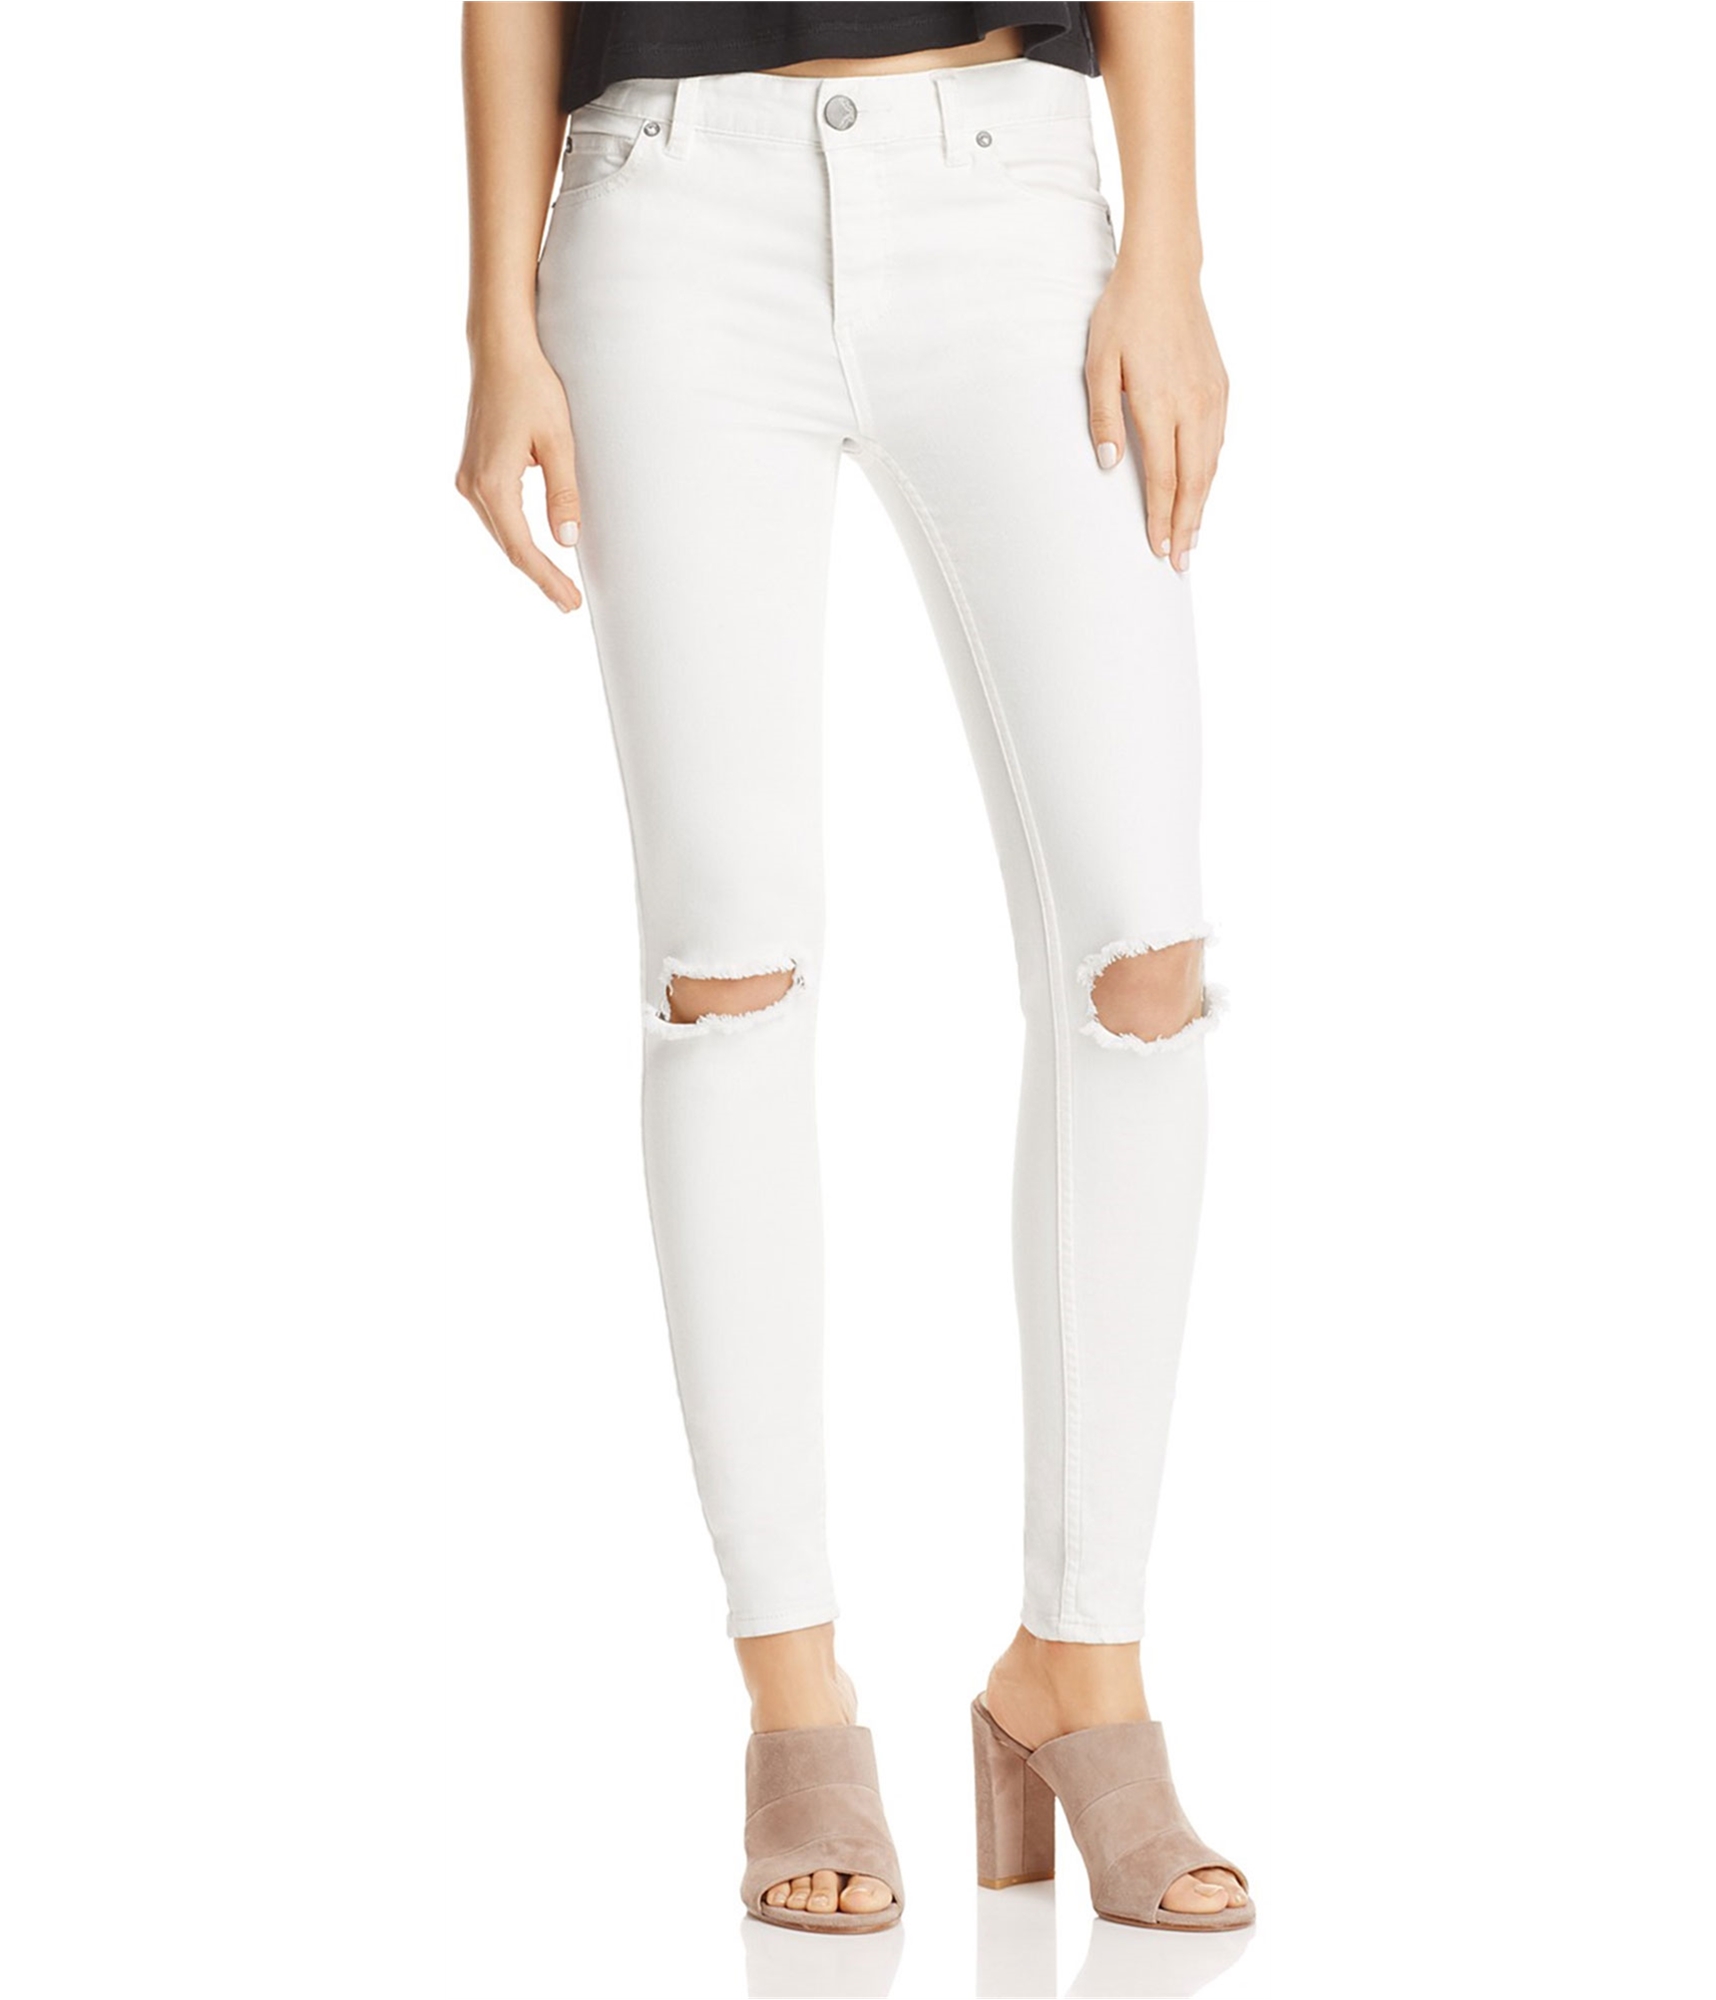 Free People Womens Busted Knee Skinny Fit Jeans, White, 25 | eBay